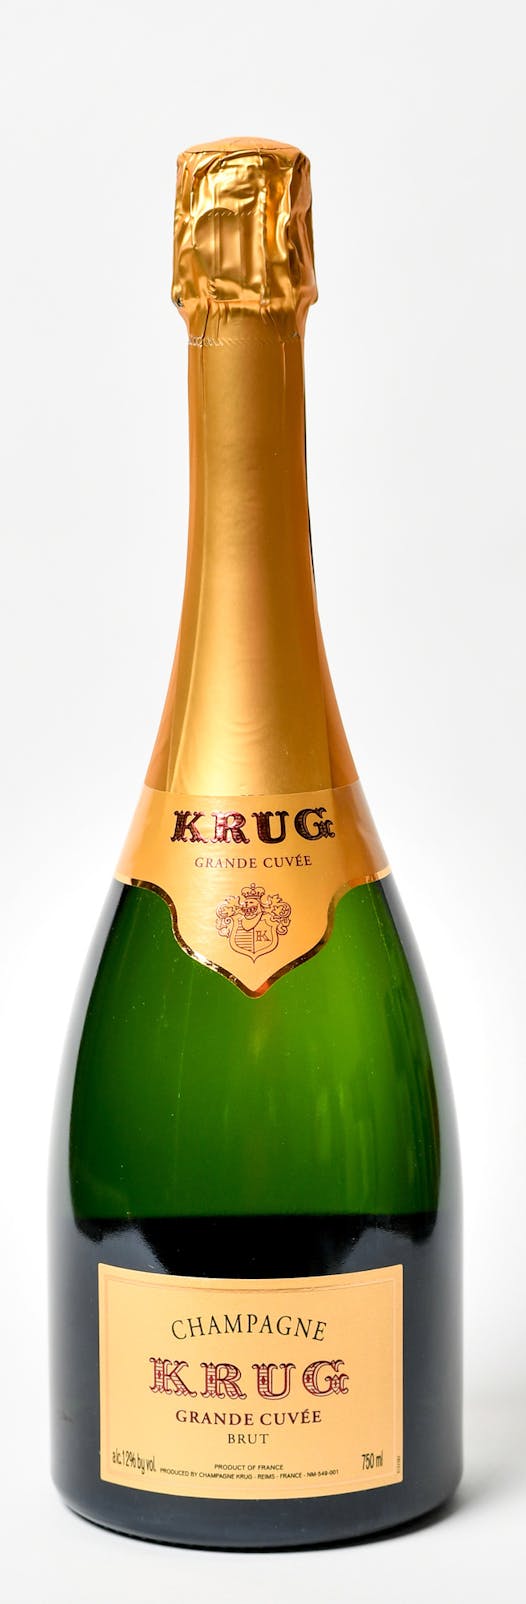 Krug ] GLEN STUBBE * gstubbe@startribune.com Tuesday, December 20, 2016 Champagne and Sparkling Wine photographed at Solo Vino, 517 Selby Ave., St Paul